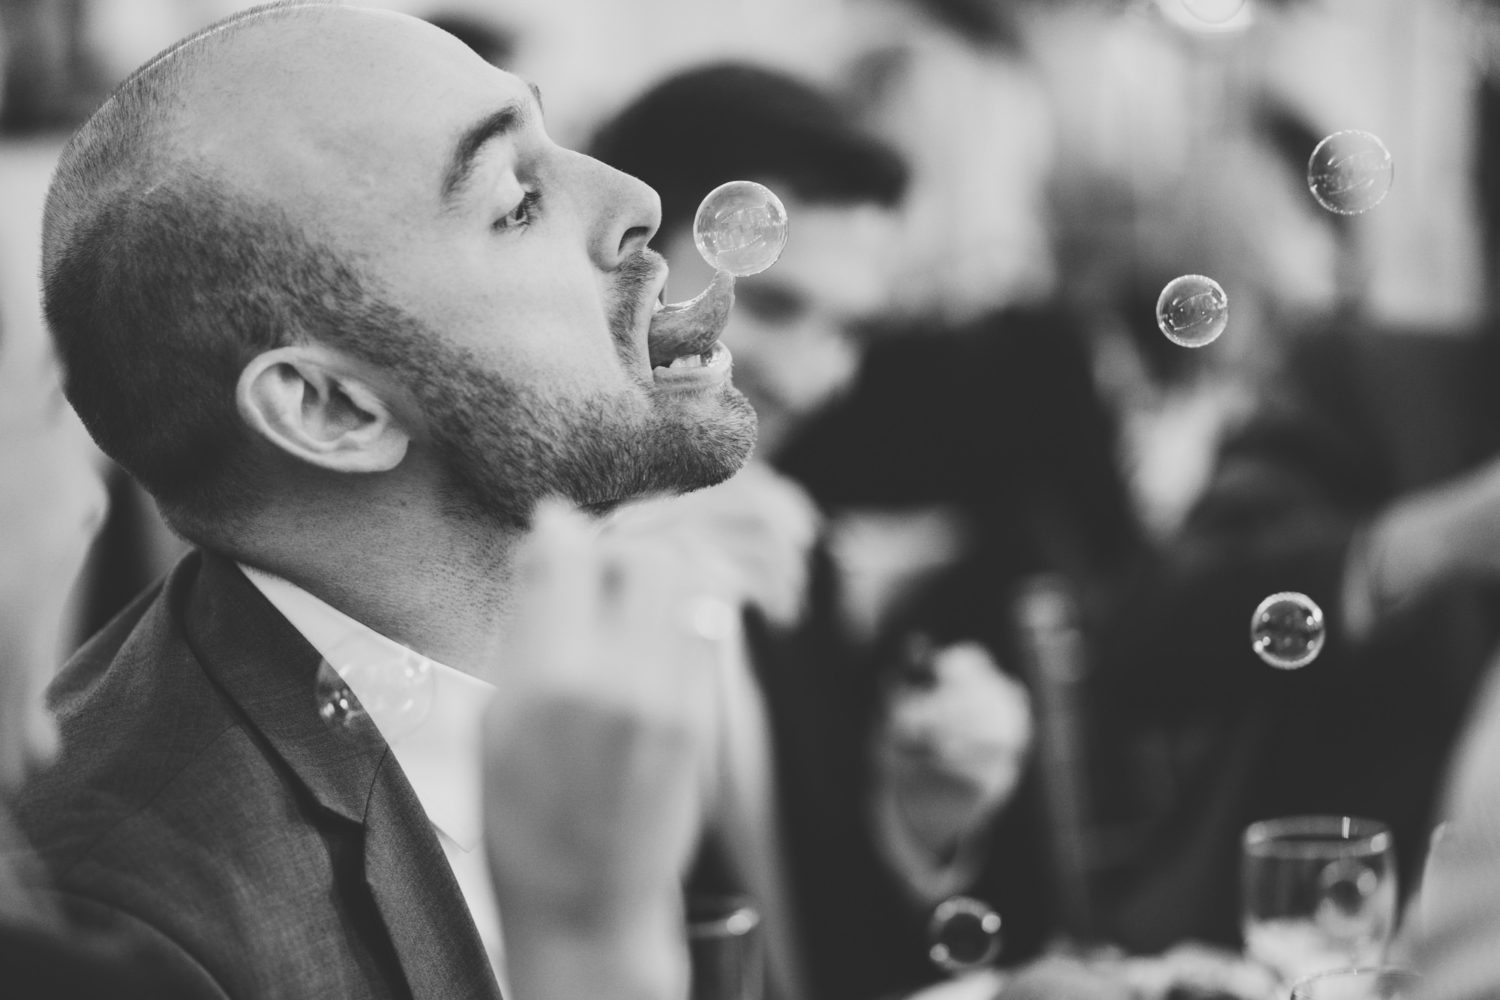 wedding guest sticking tongue out to pop bubble during wedding reception